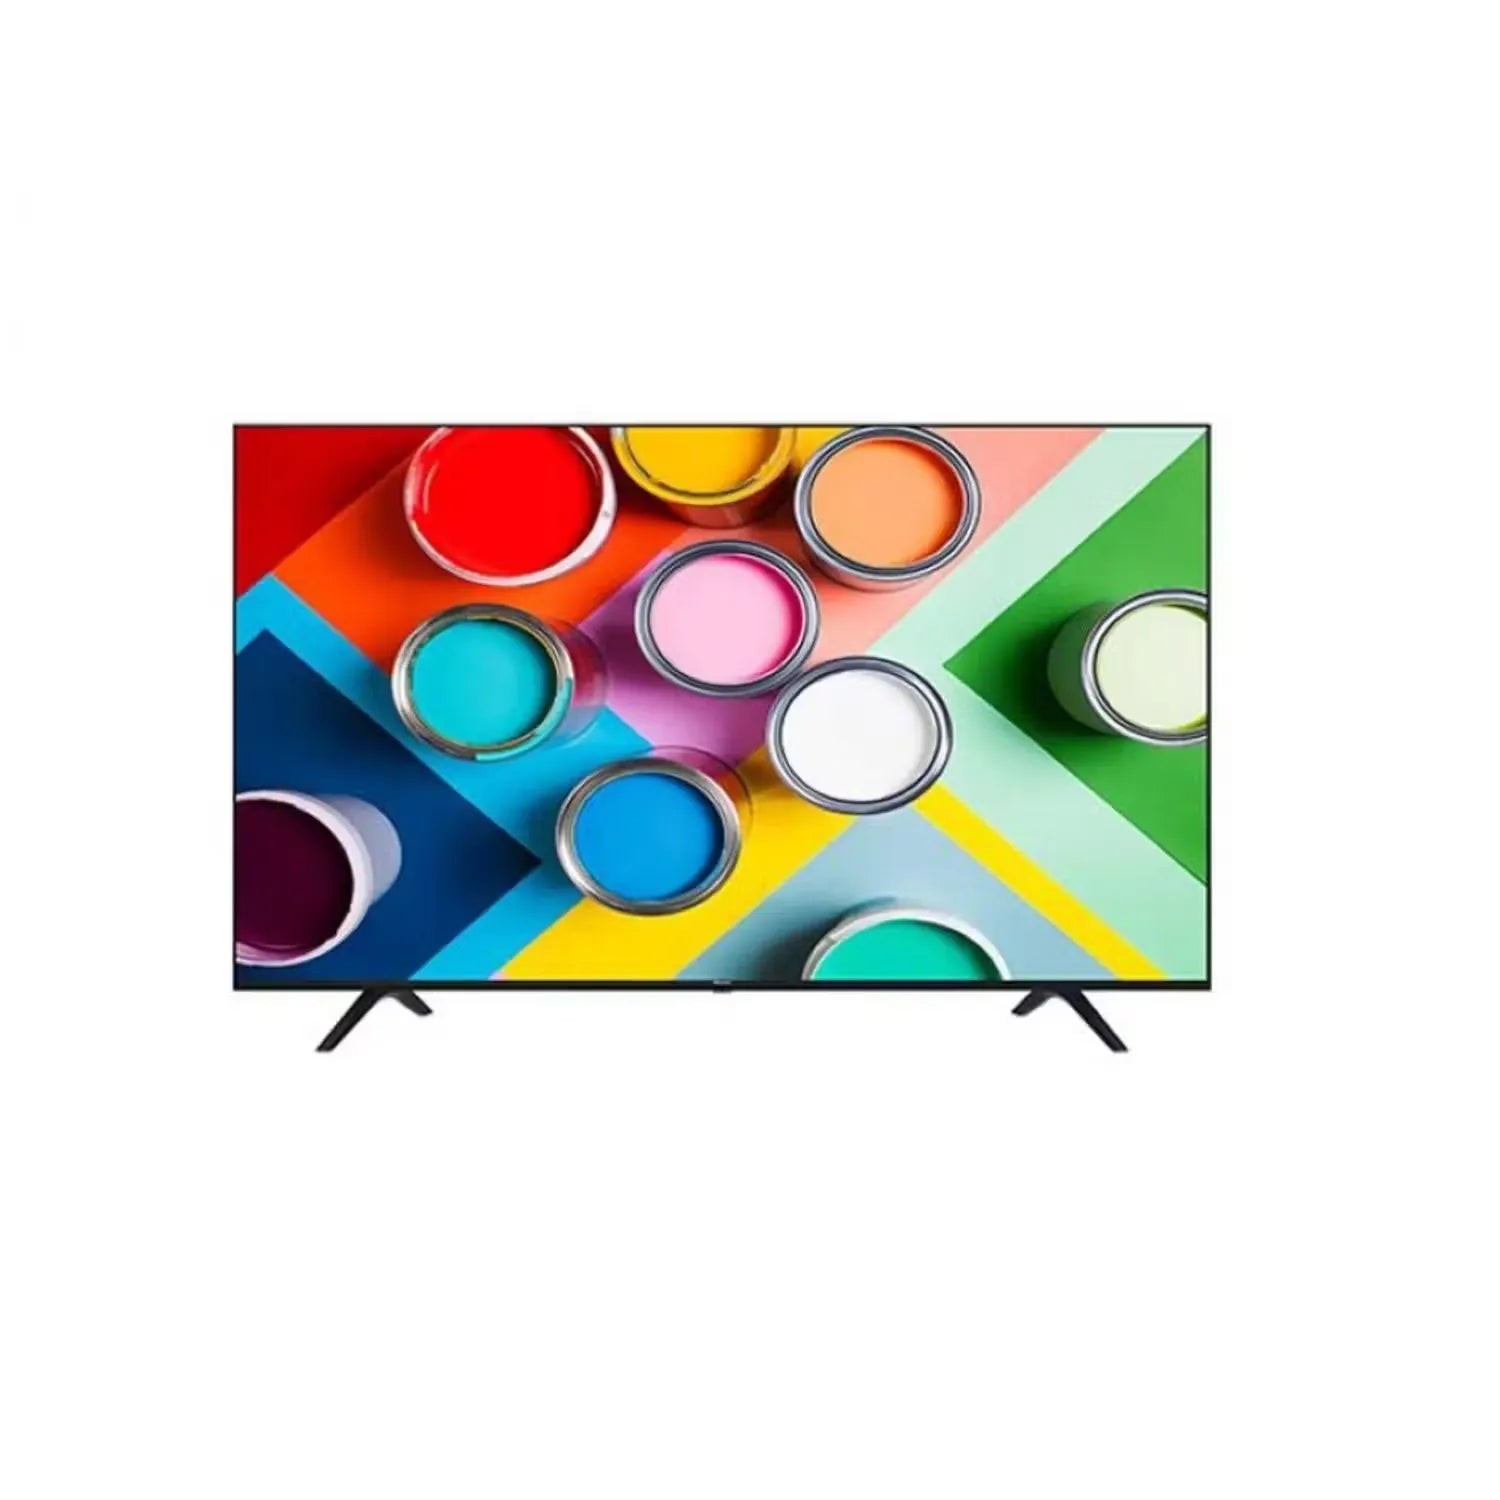 Hisense 50A61G 50-inch 4K UHD Smart TV with sleek black design and narrow bezels, displaying a vibrant image on the screen.